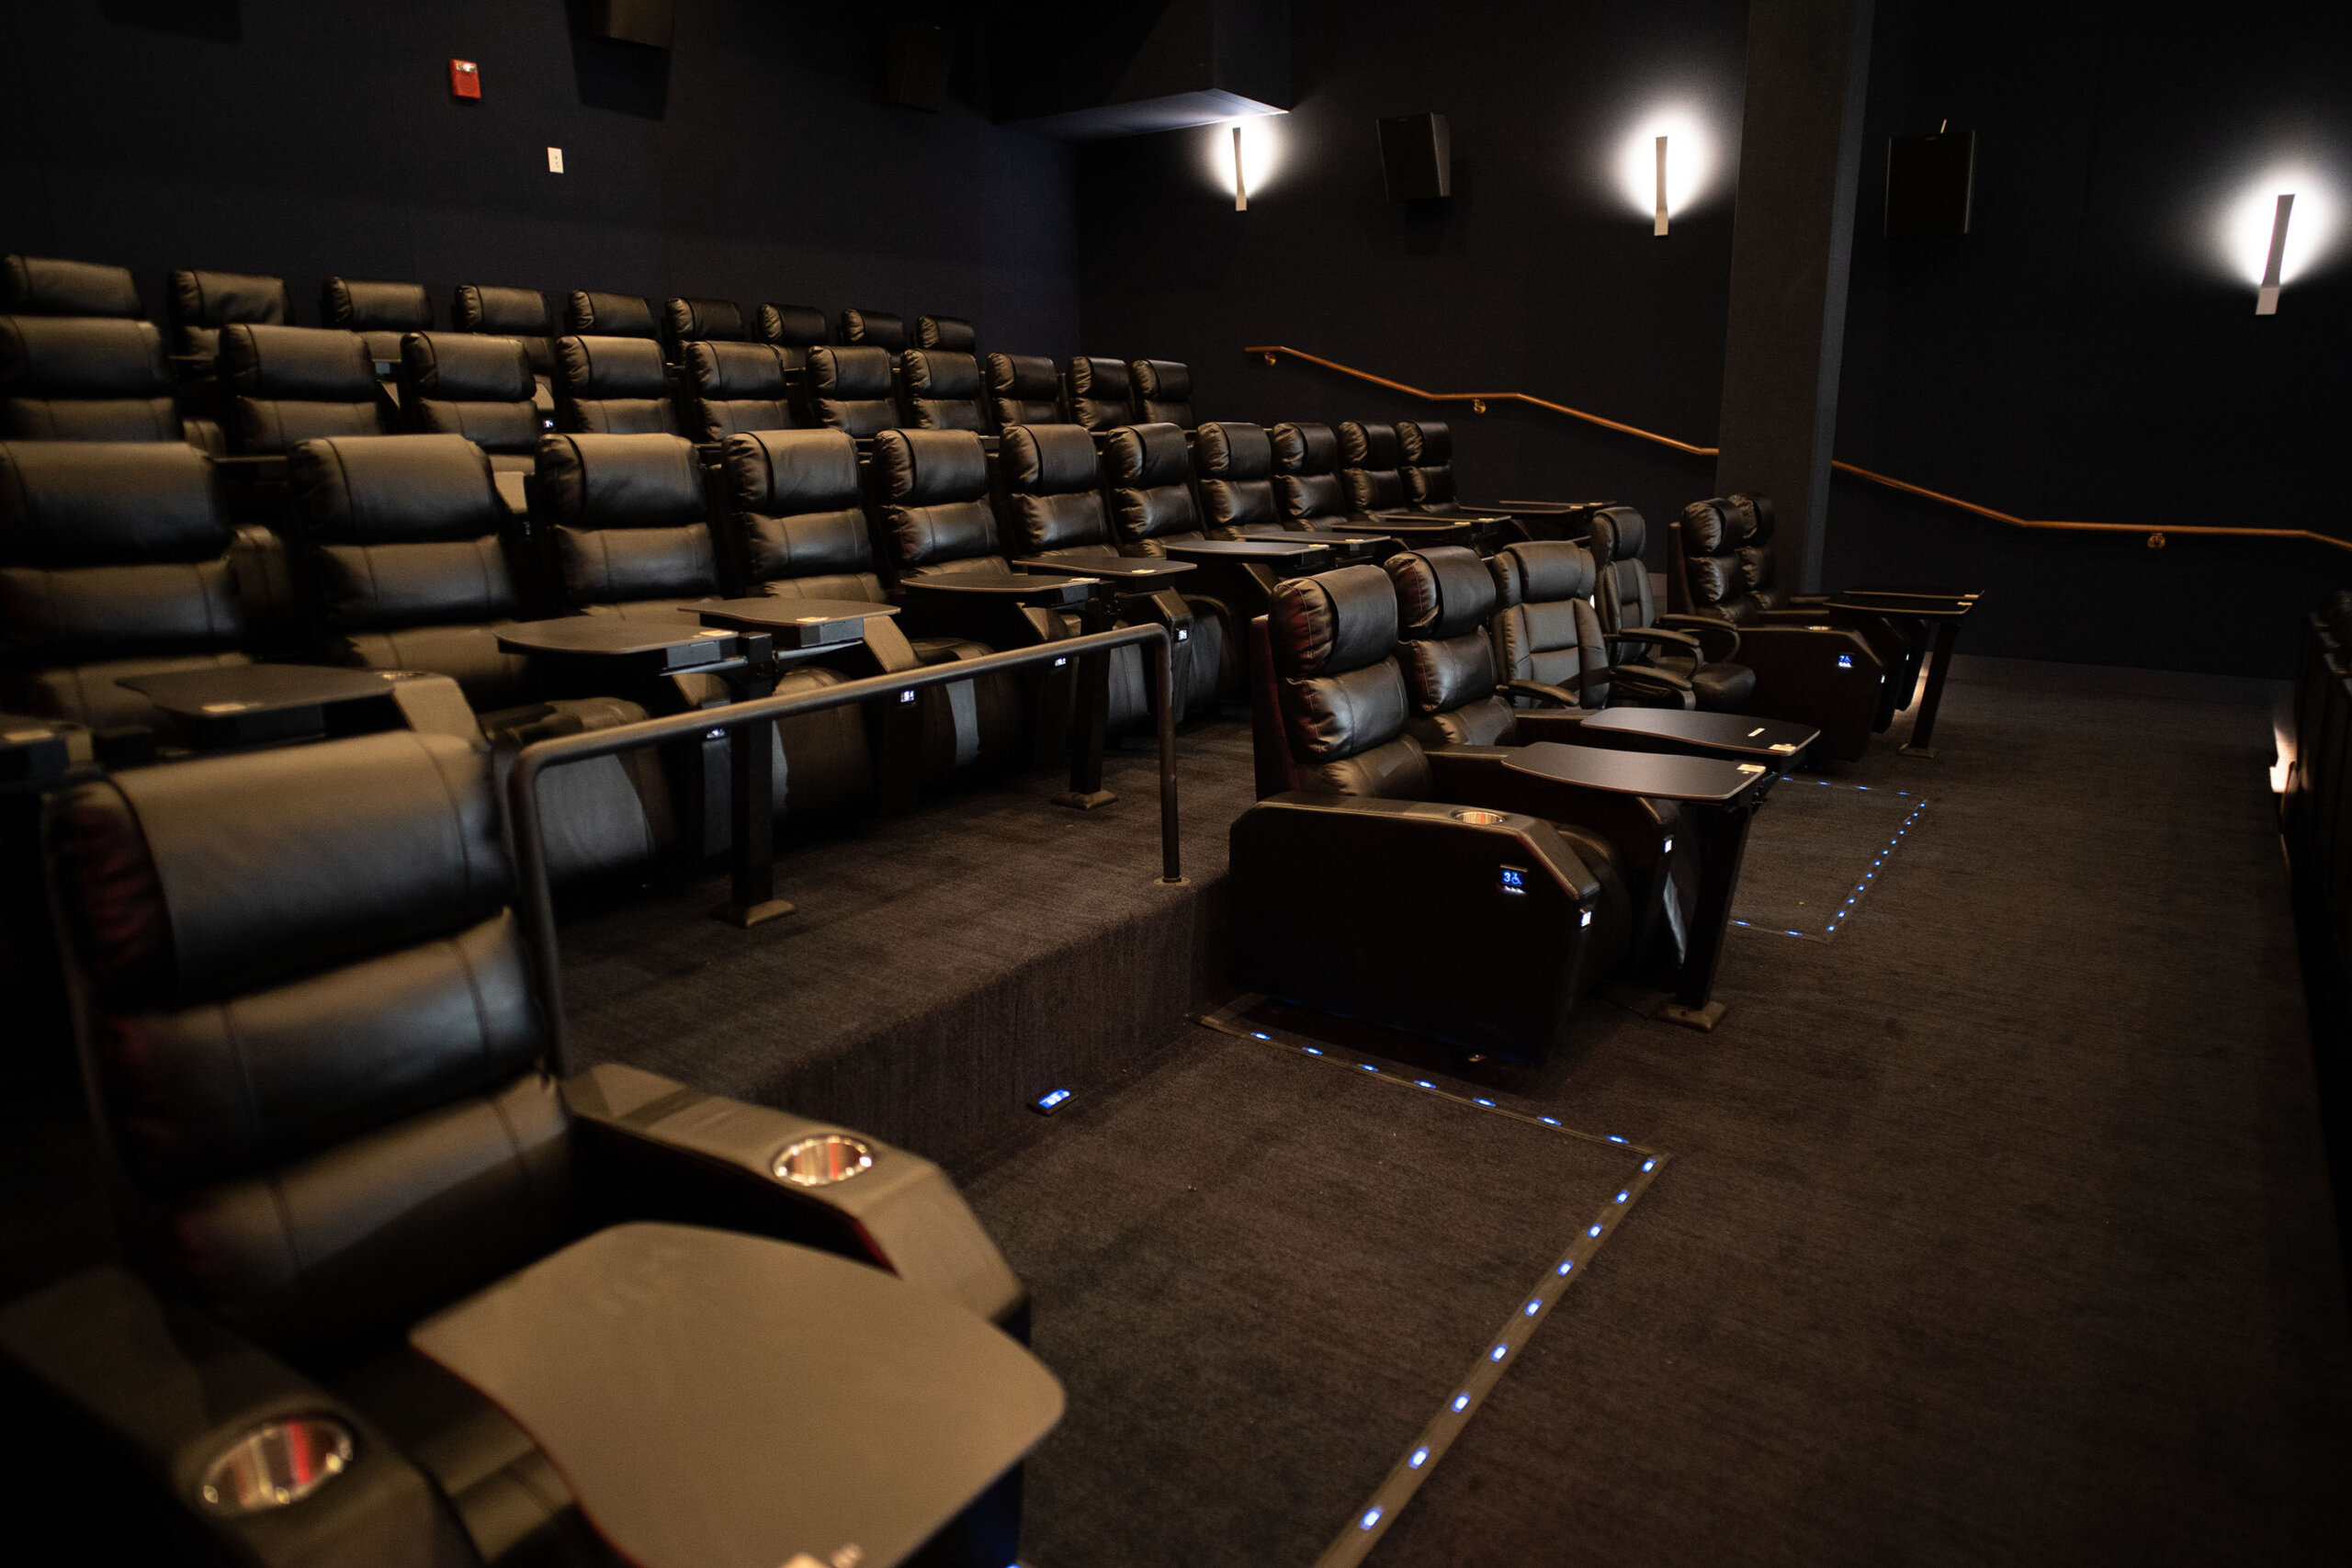 Reston’s new LOOK Cinemas Reclining seats, intheater dining and one